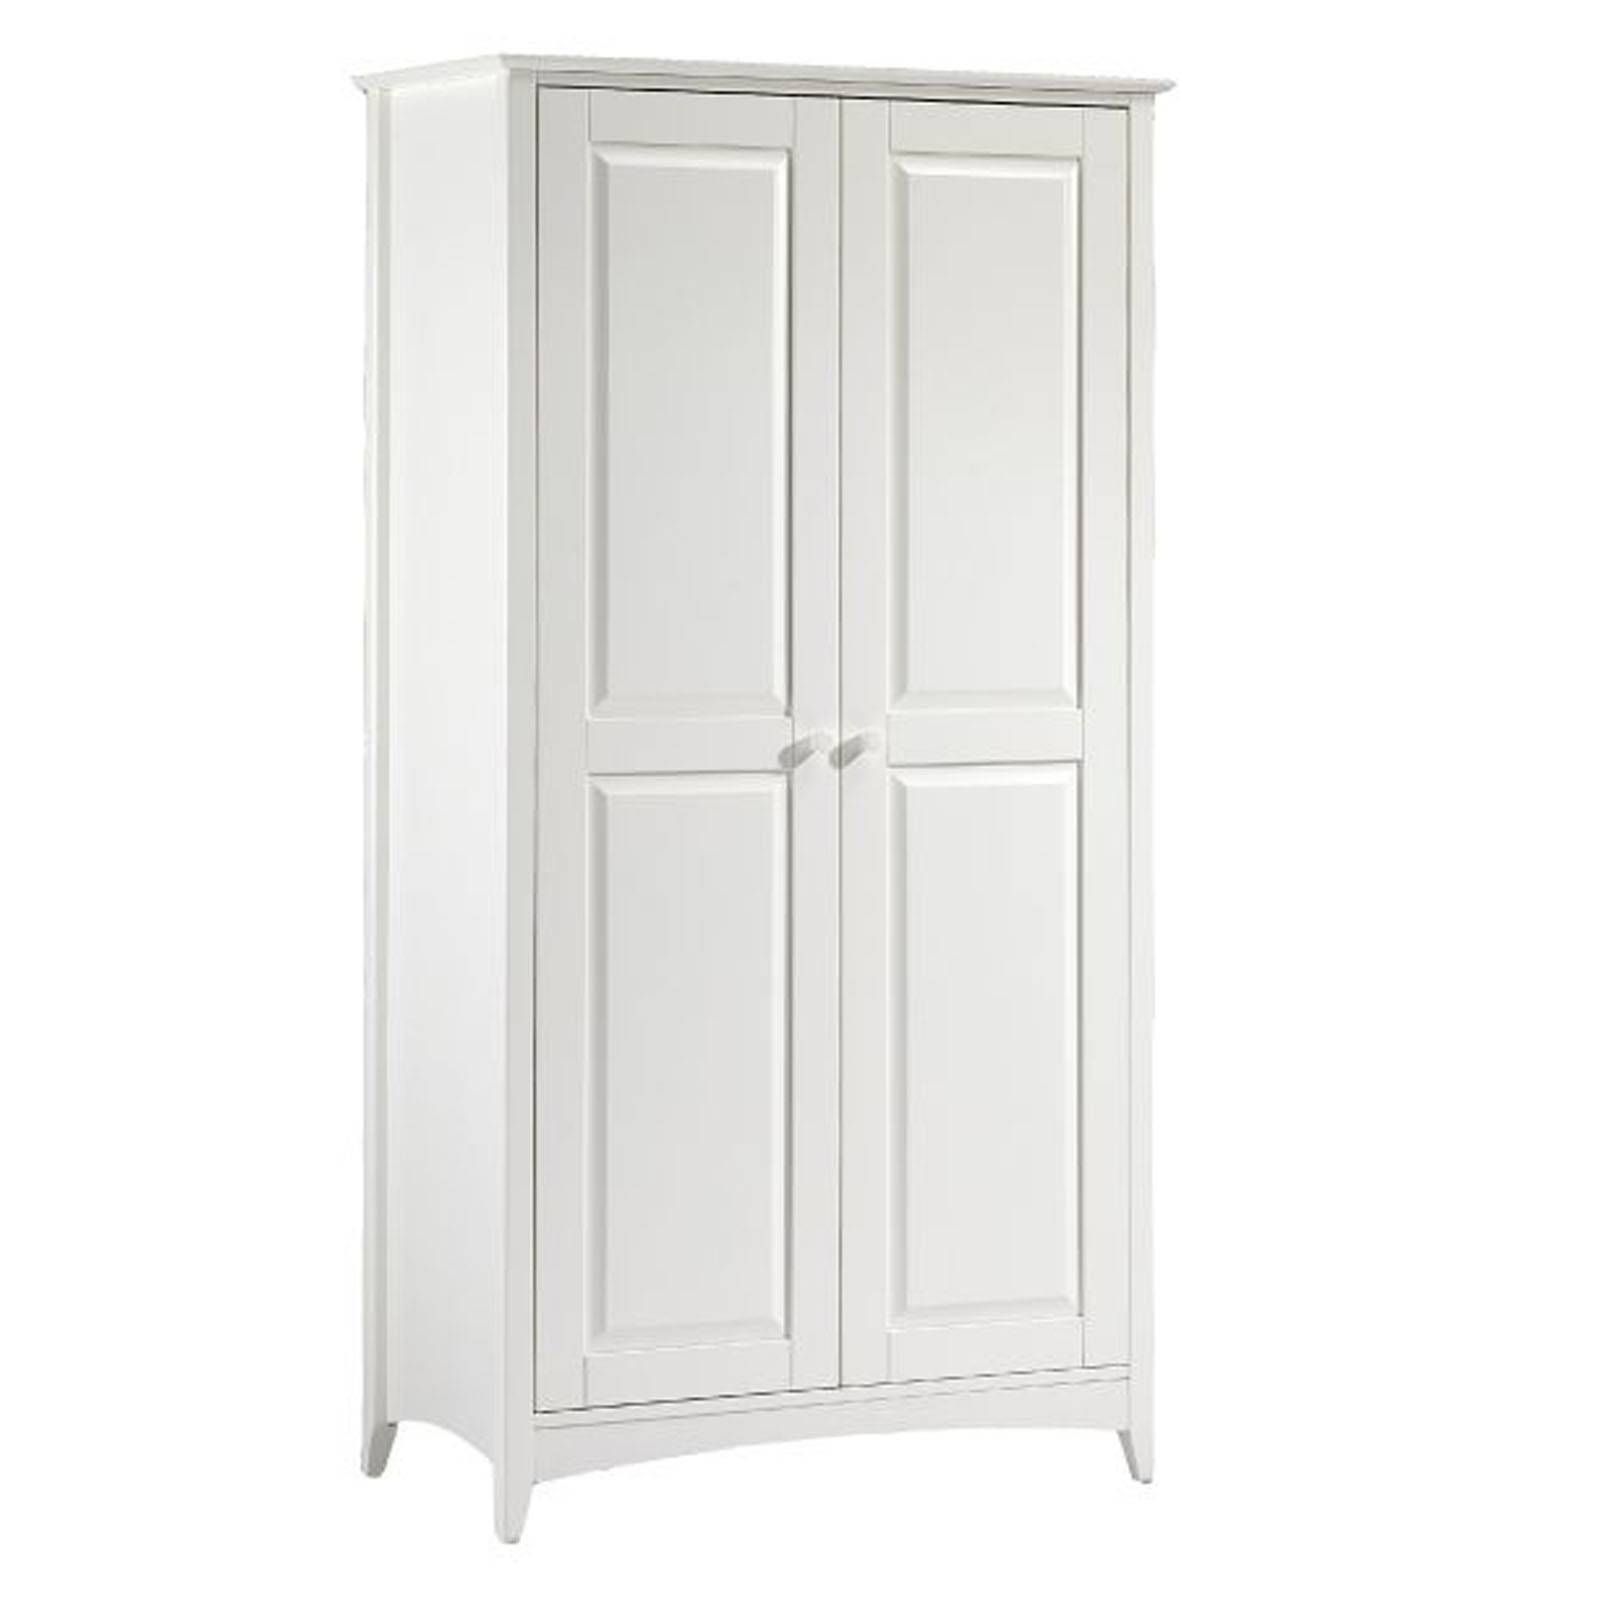 Outstanding Quality | Julian Bowen Cameo 2 Door Wardrobe | Quick Intended For Cameo Wardrobes (View 7 of 15)